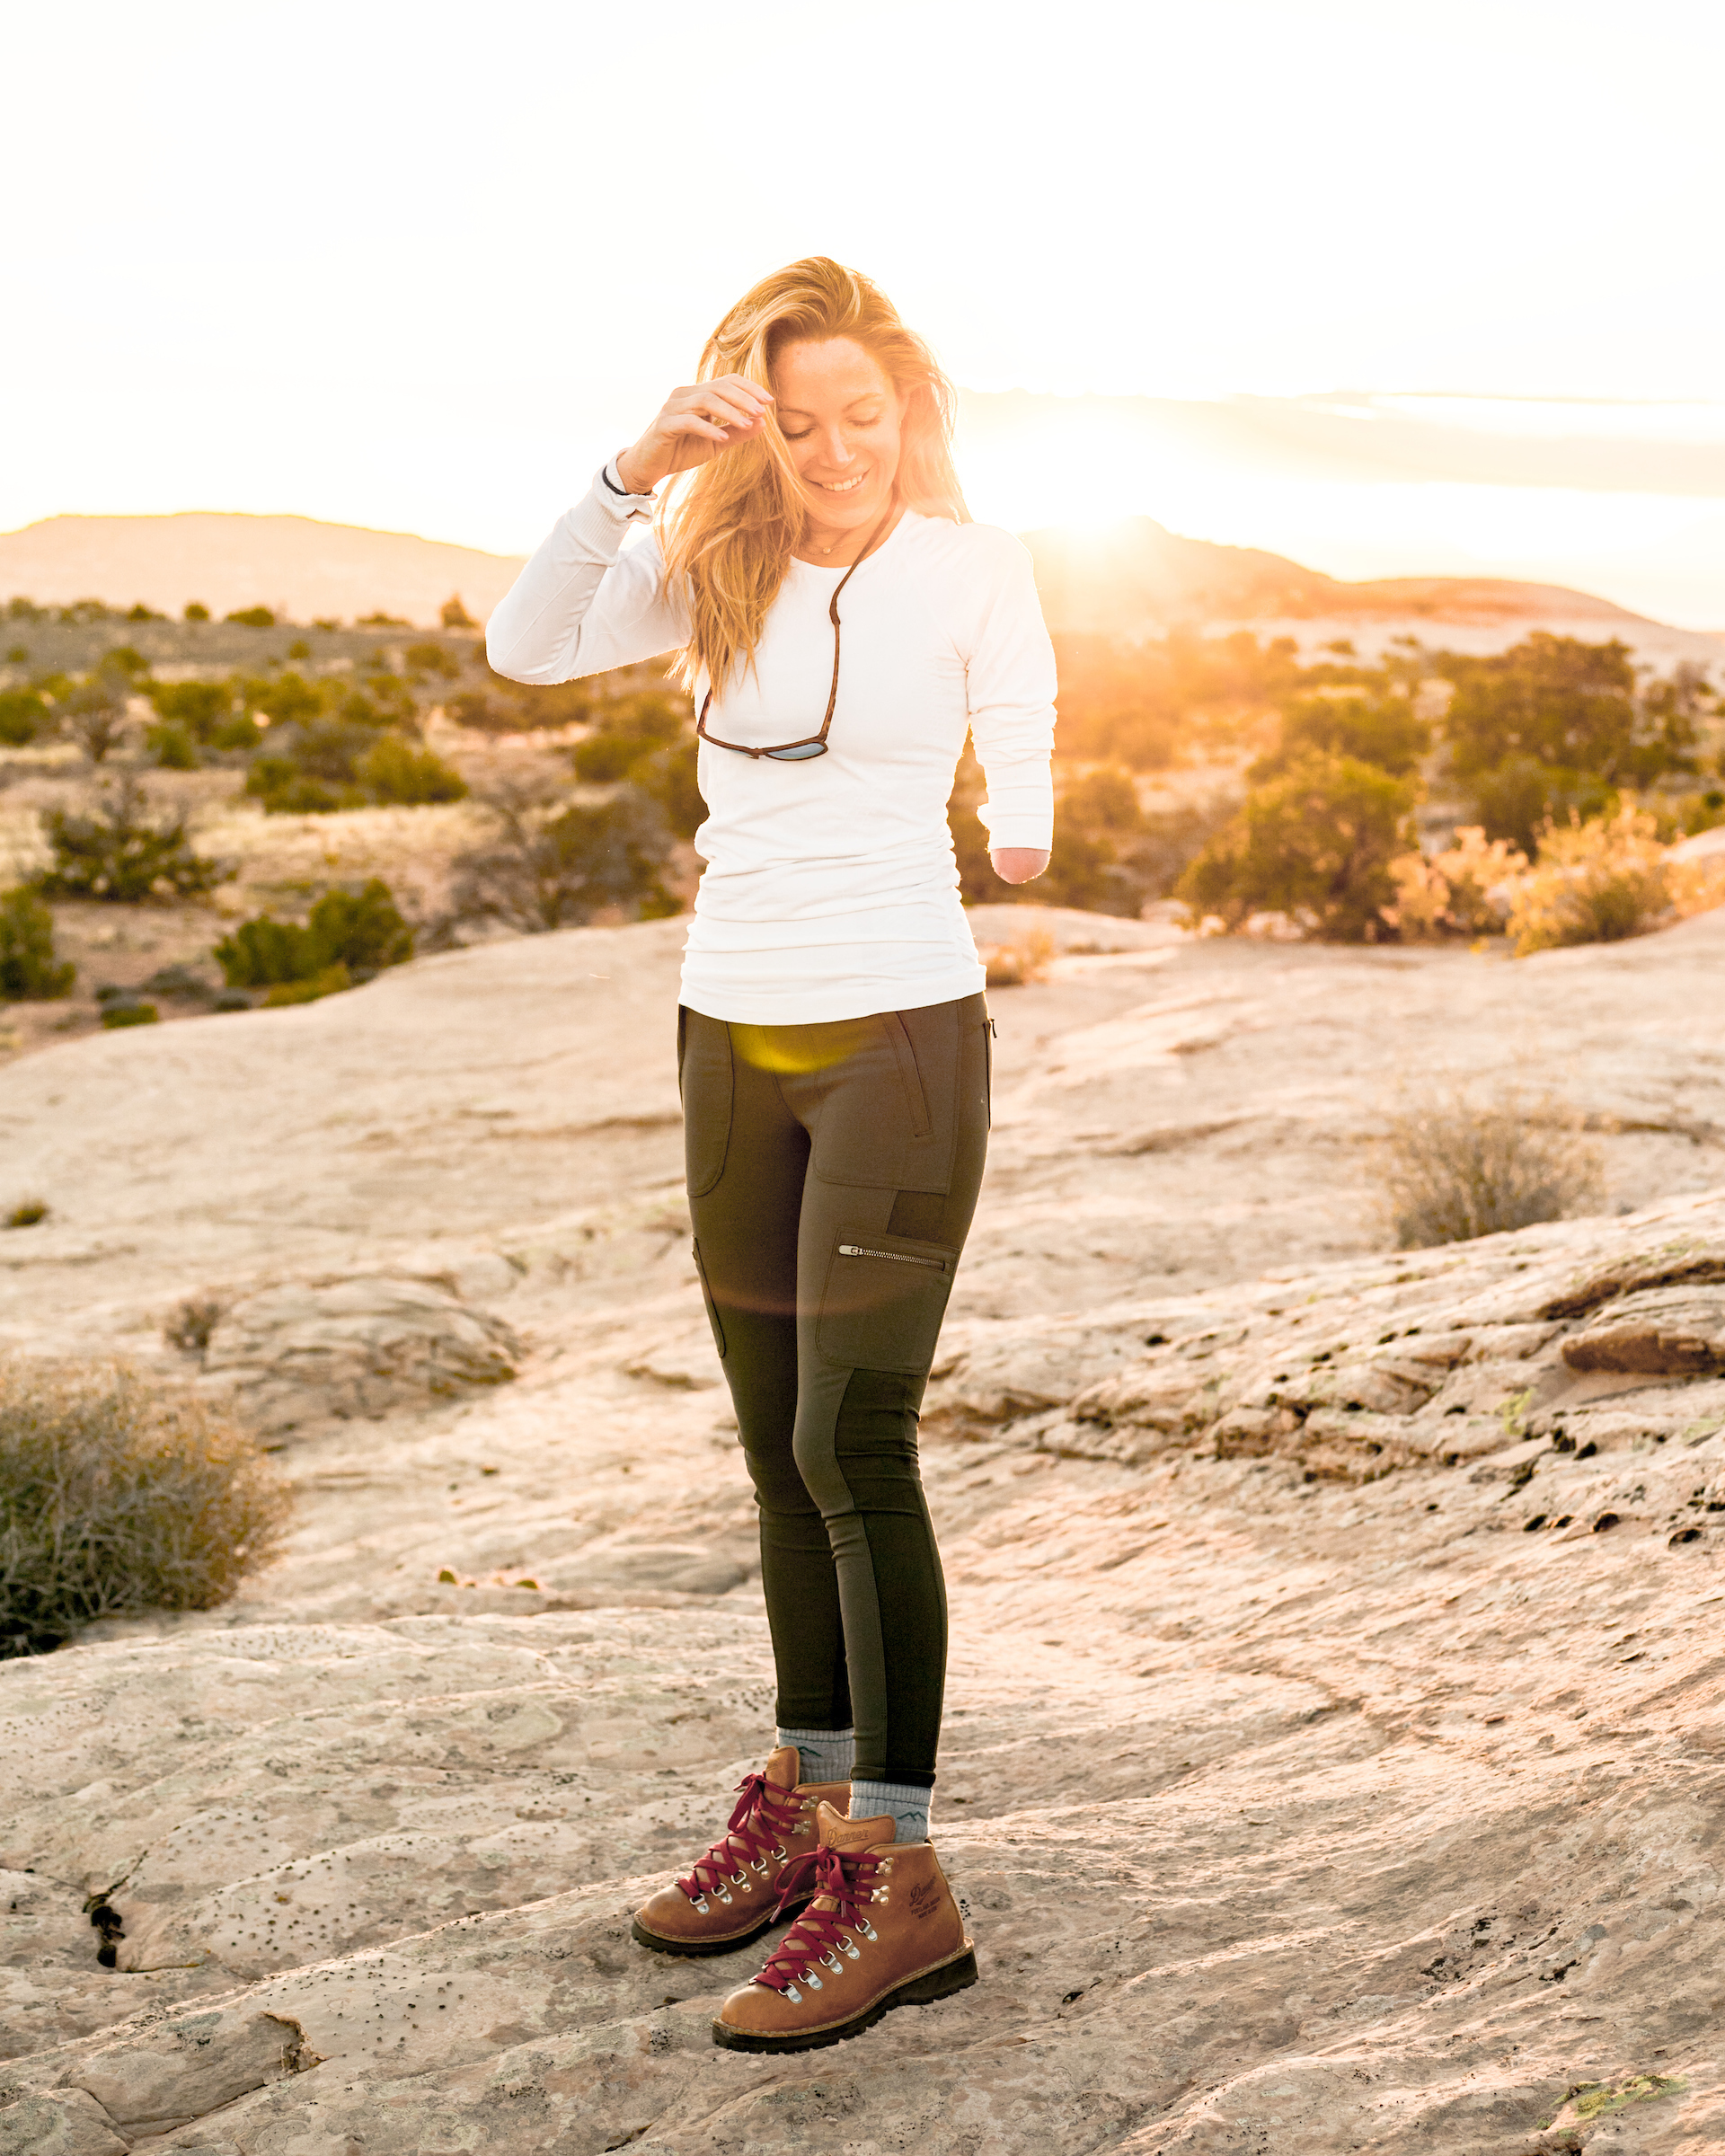 Sunrise photoshoot with Athleta and Danner Boots, by Adventure and lifestyle photographer Dylan H. Brown